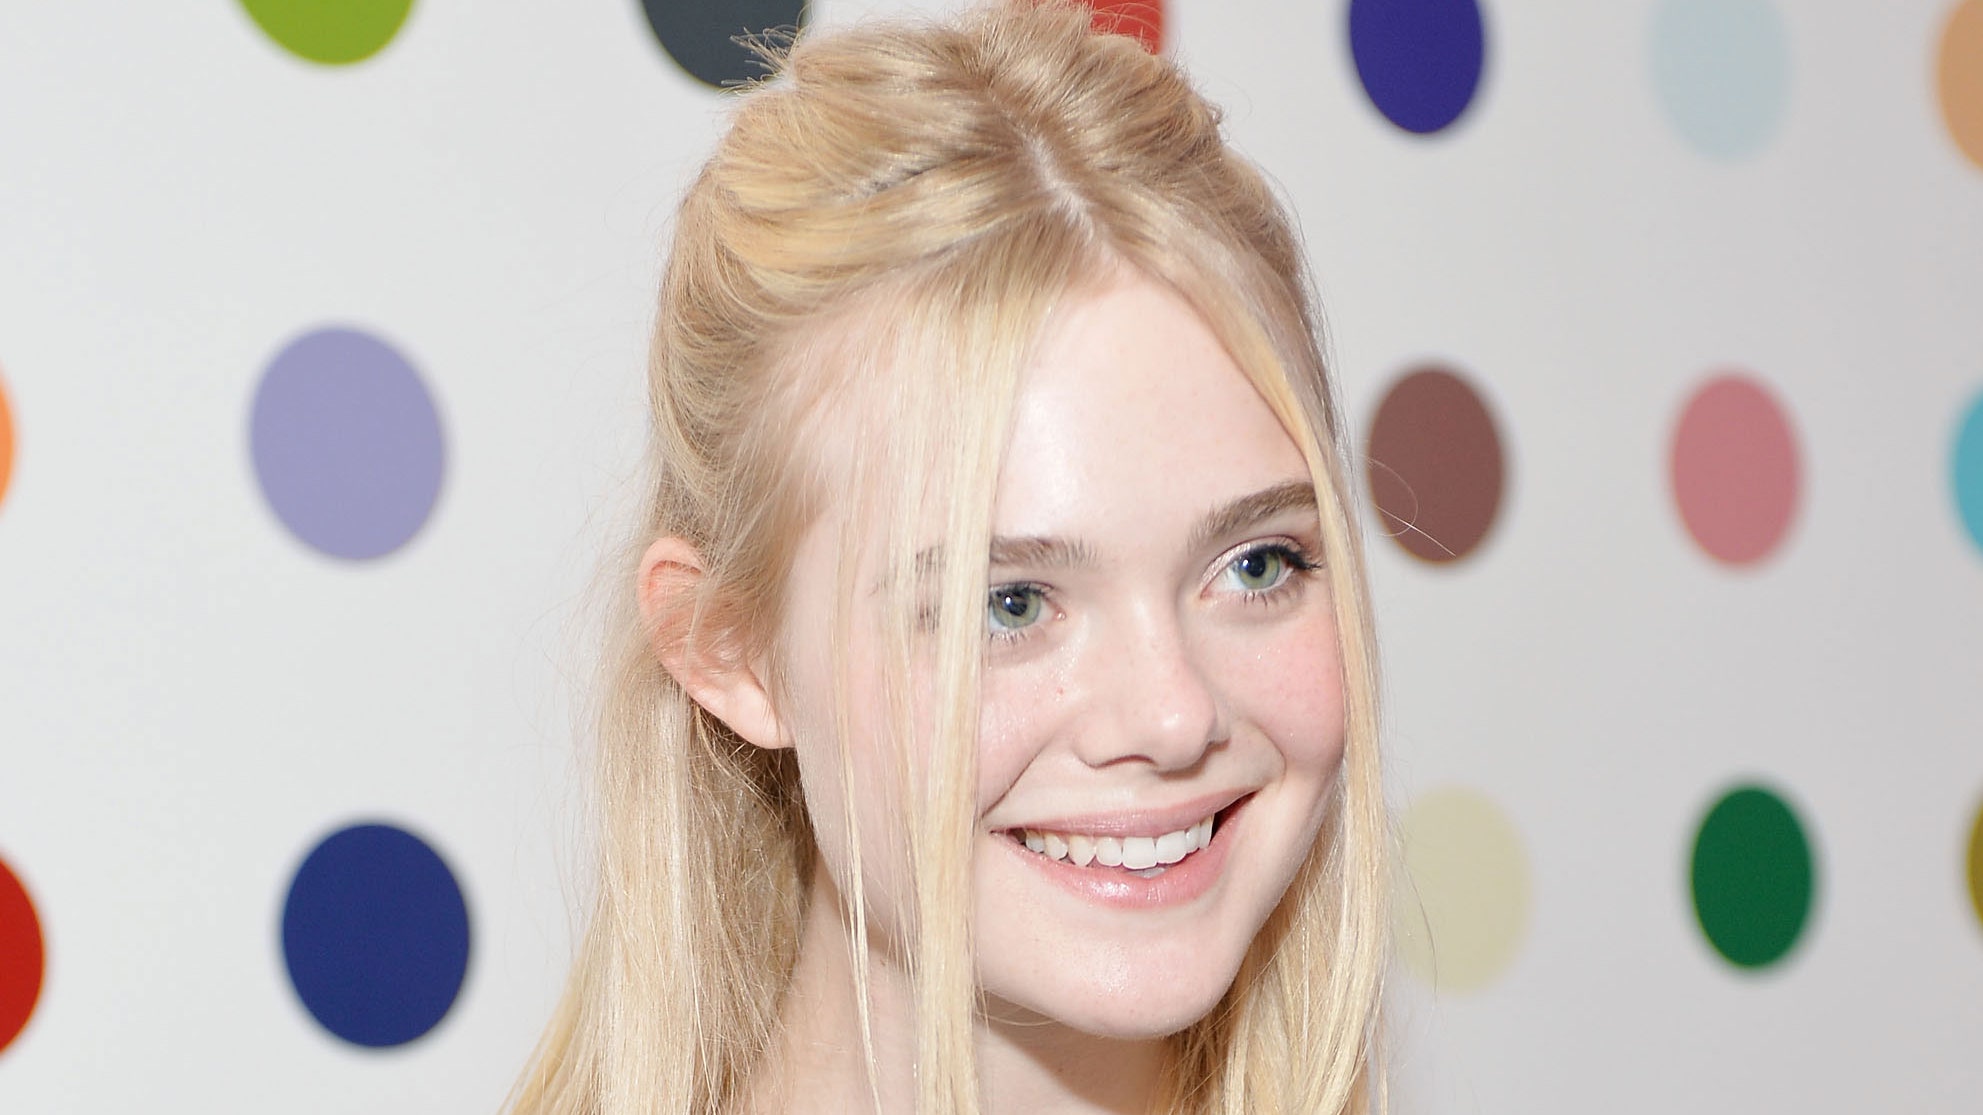 Elle Fanning’s Plastic Surgery – What We Know So Far